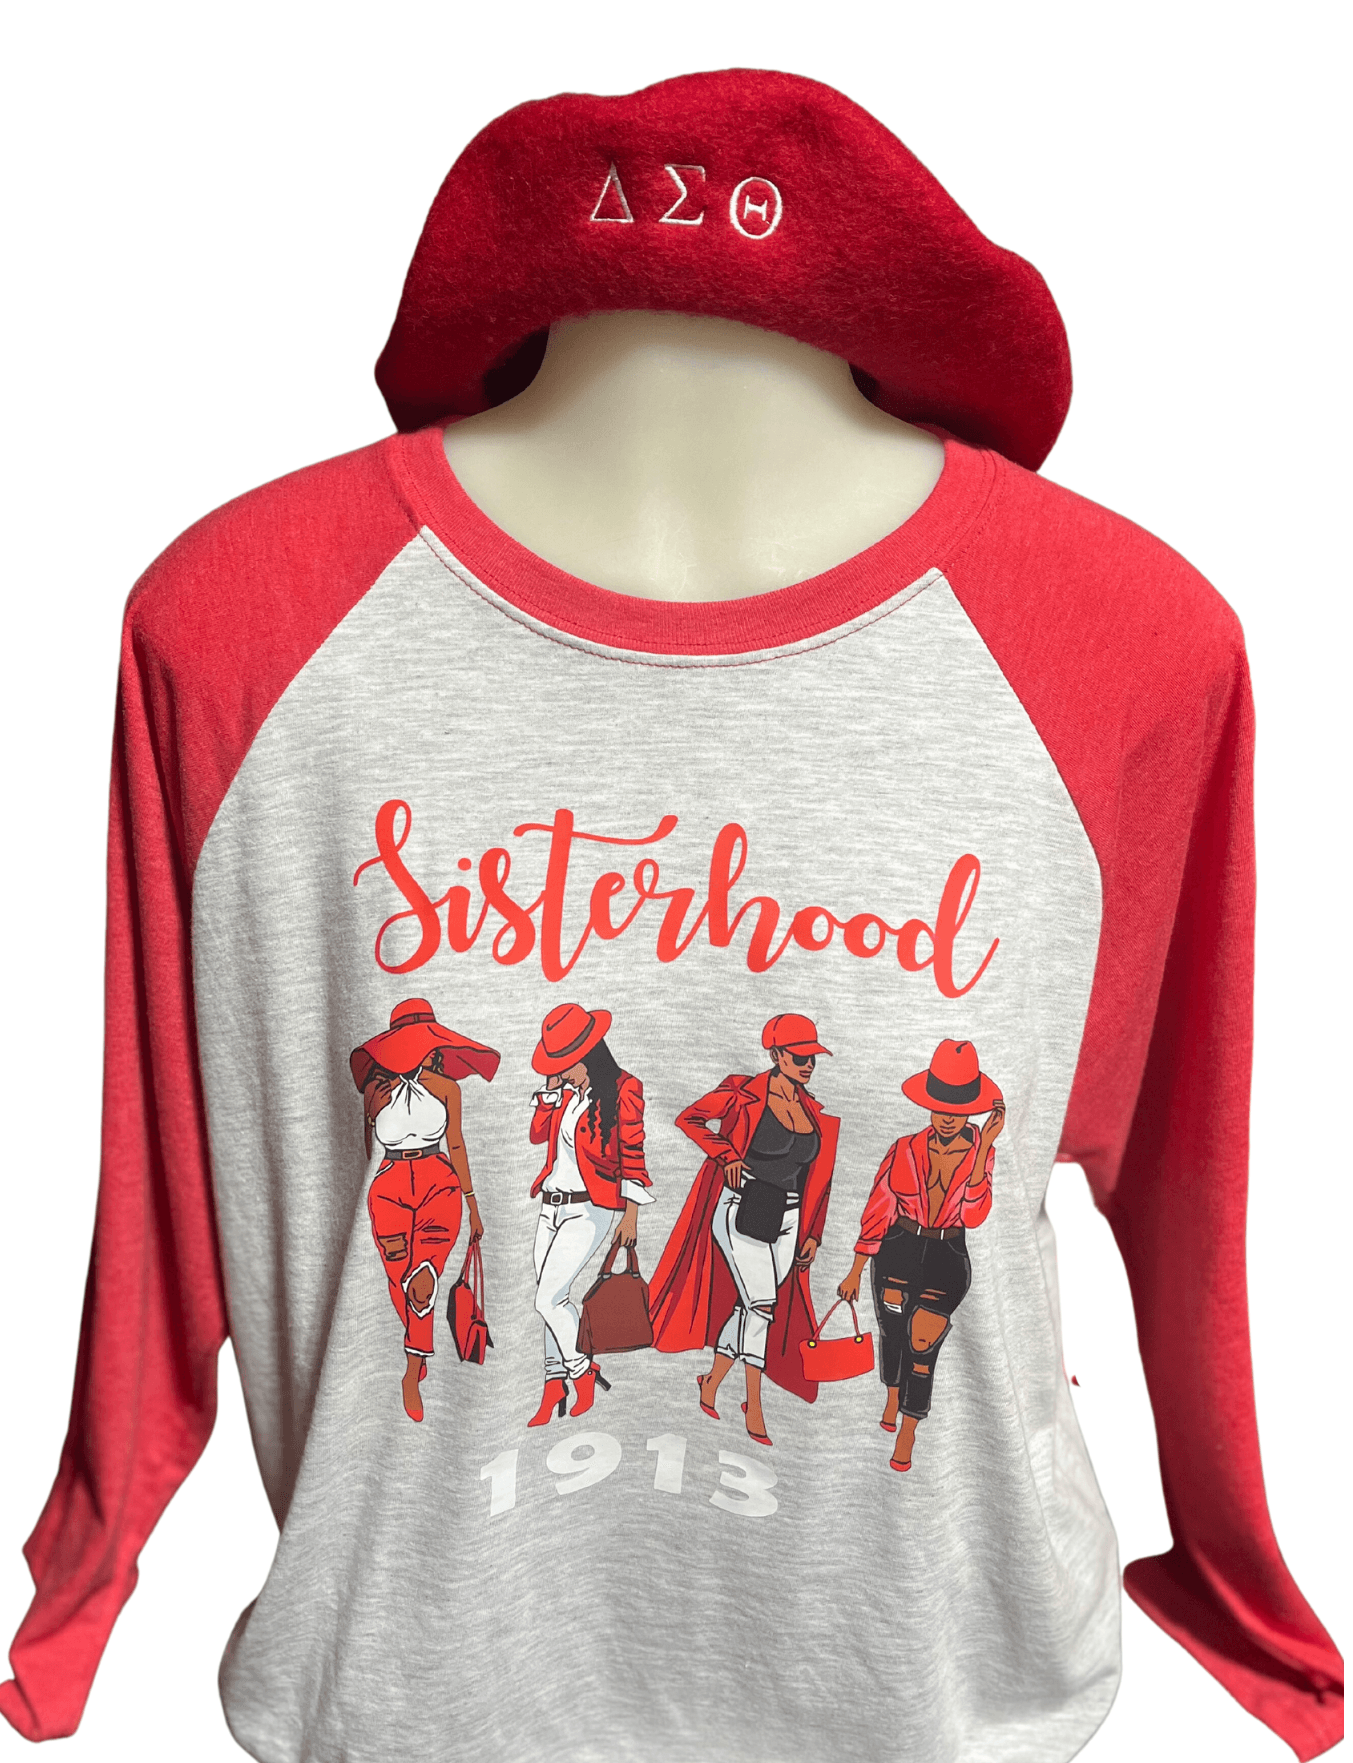 Heather Gray & Red Adult Baseball Shirt features the perfect blend of materials to create the ultimate, soft shirt for our sisterhood custom design. It is designed with red sleeves, a red neck, and a light heather gray center. 